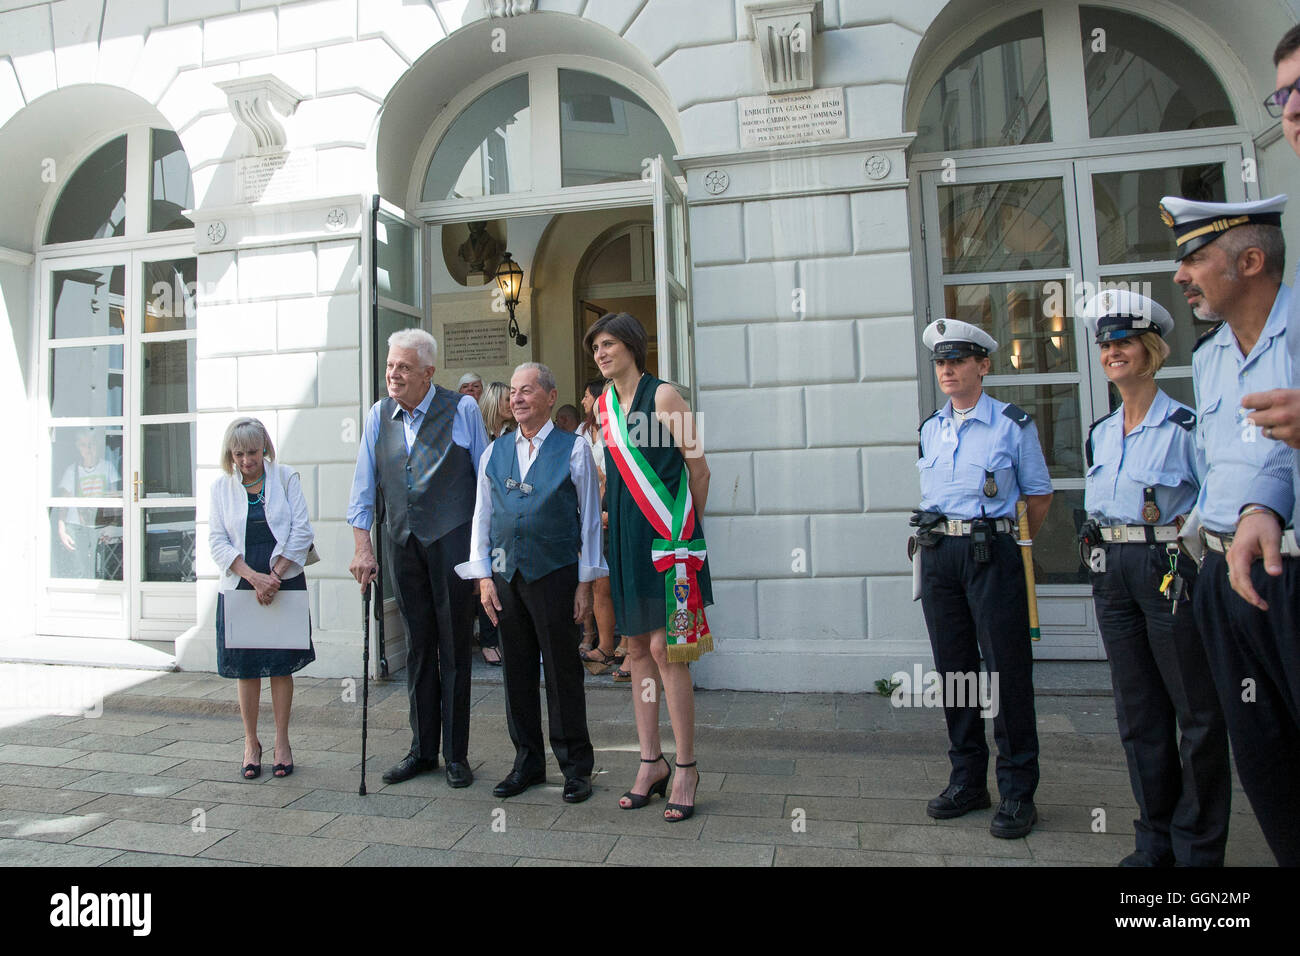 TURIN, ITALY - August 6, 2016: The mayor Chiara Appendino will receive the first declaration  of civil union constitution in Turin.  The first "civilly united" will Franco and Gianni, respectively 82 and 79 years in a relationship that  has lasted more than 50 years 6 August 2016 in Turin, Italy Credit:  Black Mail Press/Alamy Live News Stock Photo